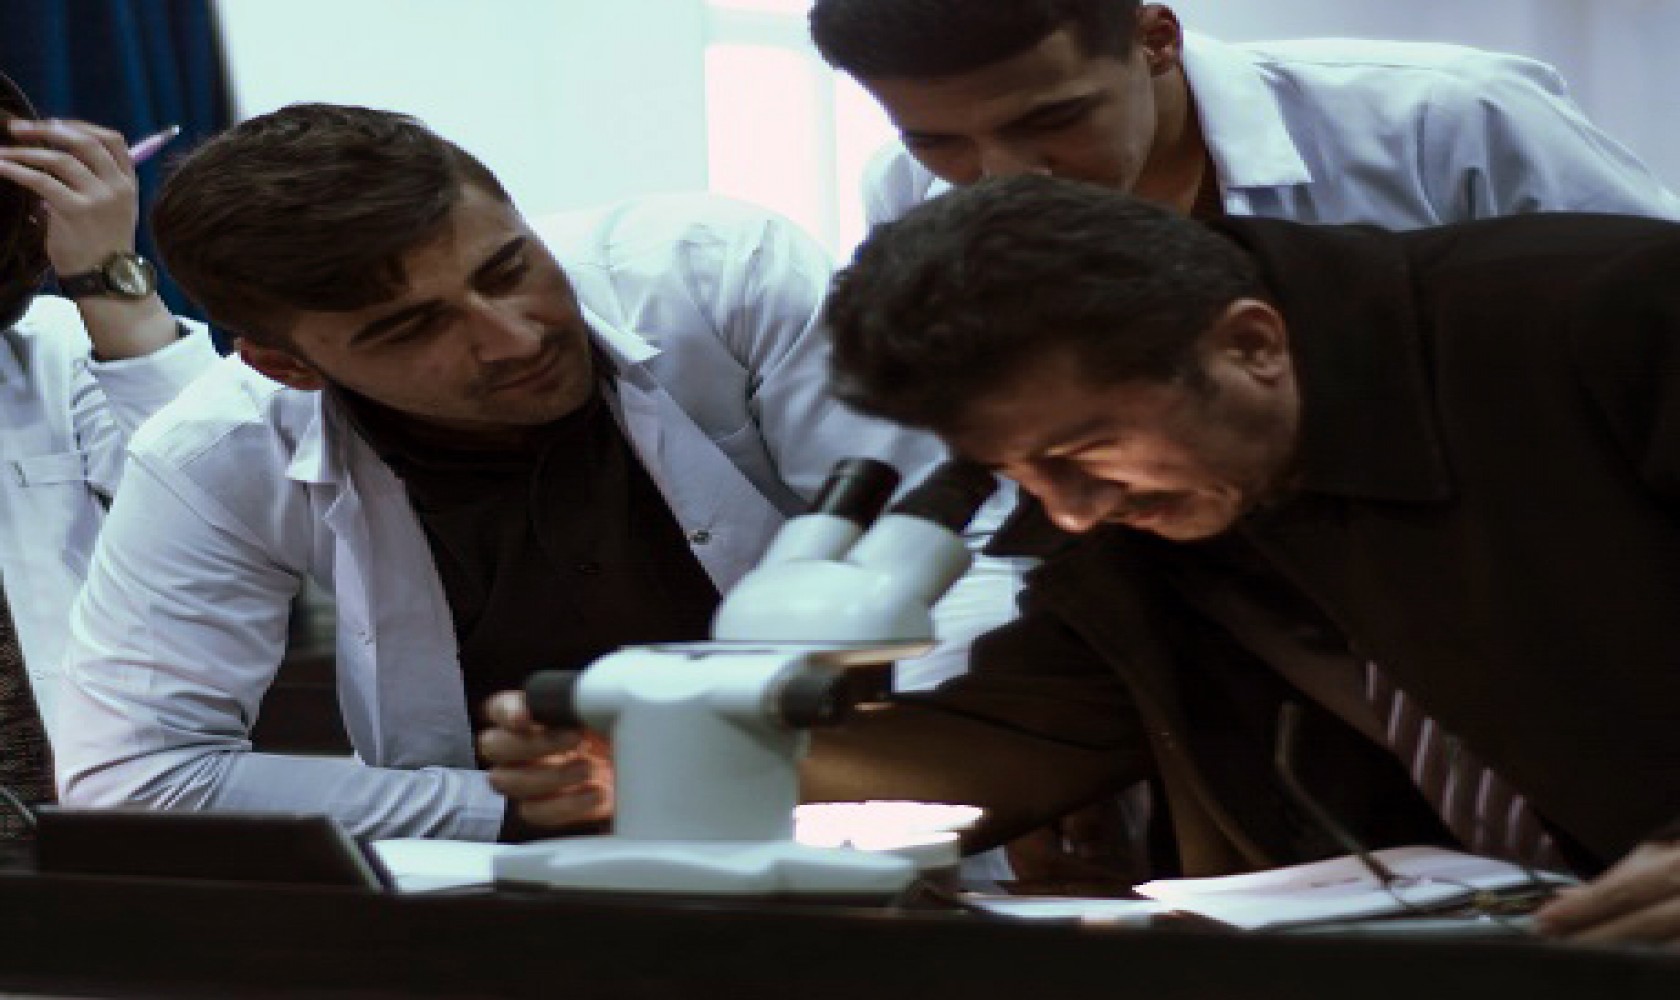 Microscope is essential instrument in the biology lab